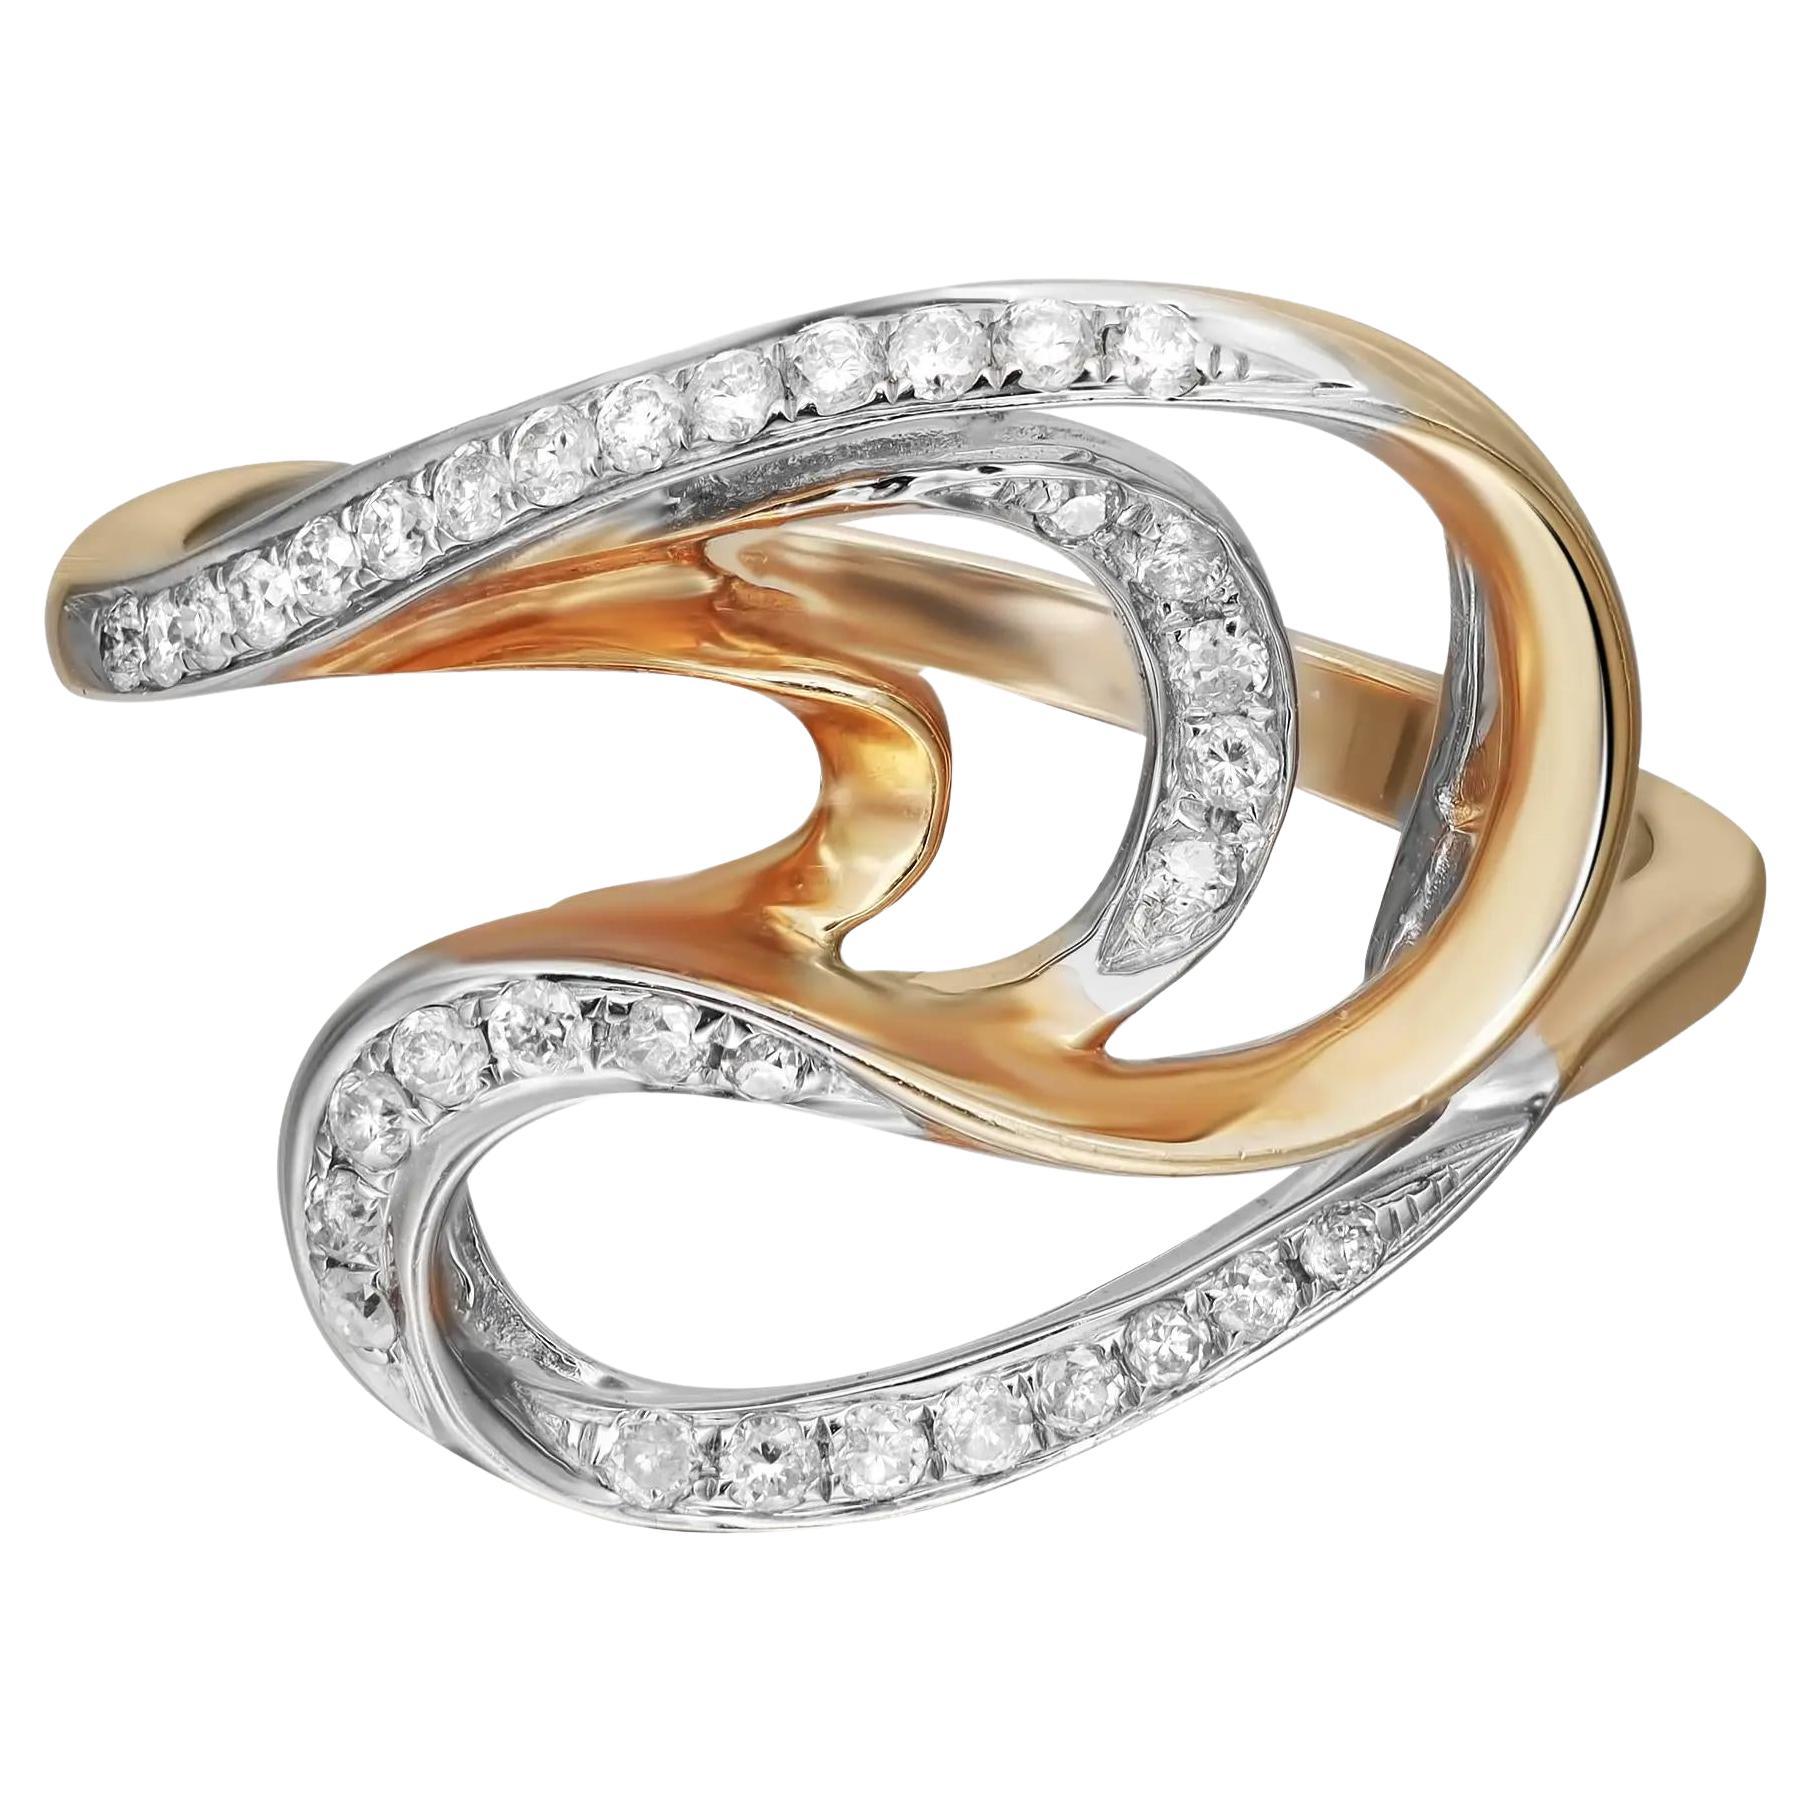 0.23Cttw Prong Set Round Diamond Ladies Swirl Ring 14K Yellow Gold Size 7.5 For Sale